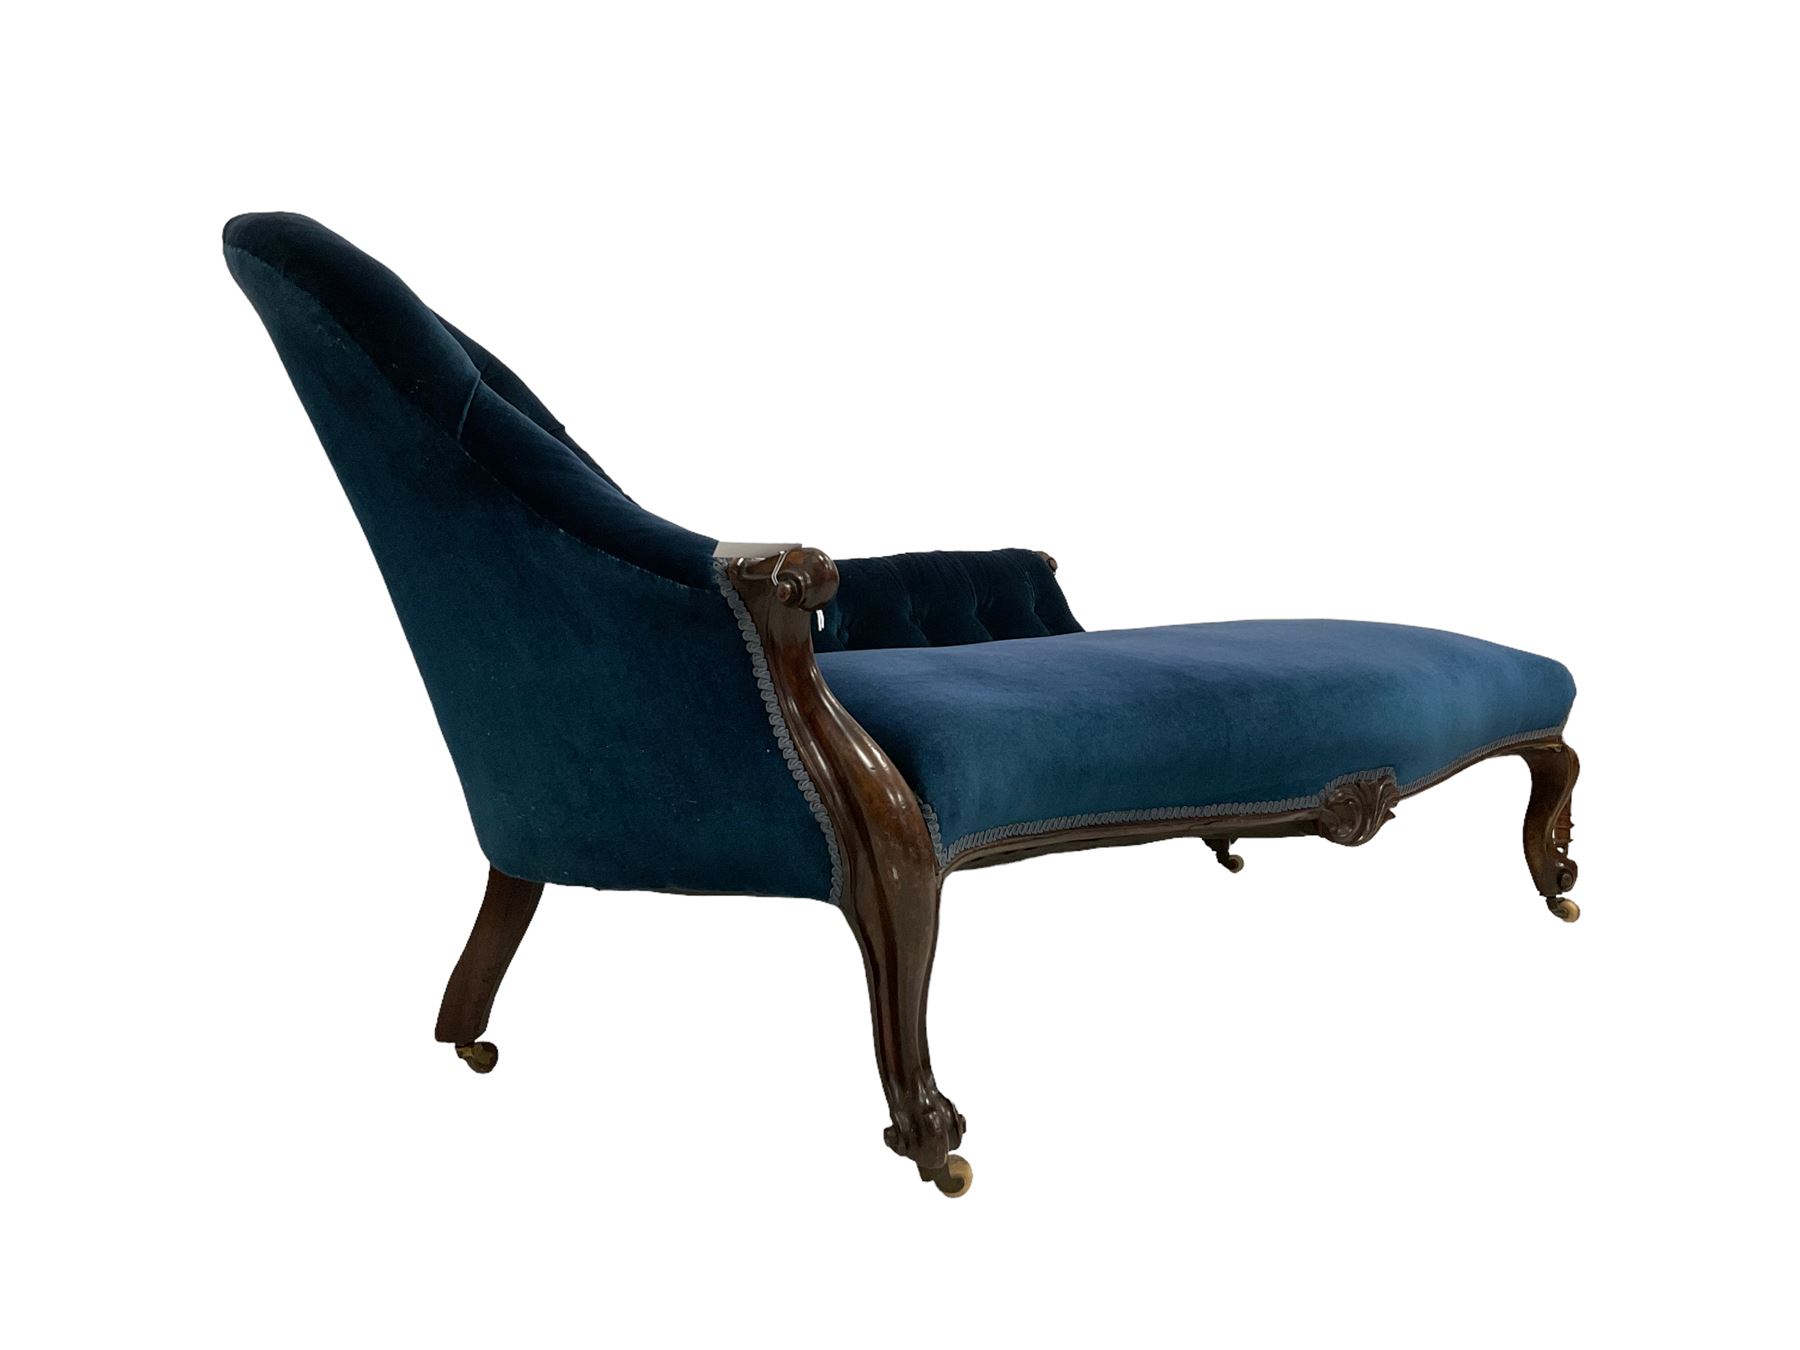 Late 19th century rosewood framed chaise longue - Image 3 of 5